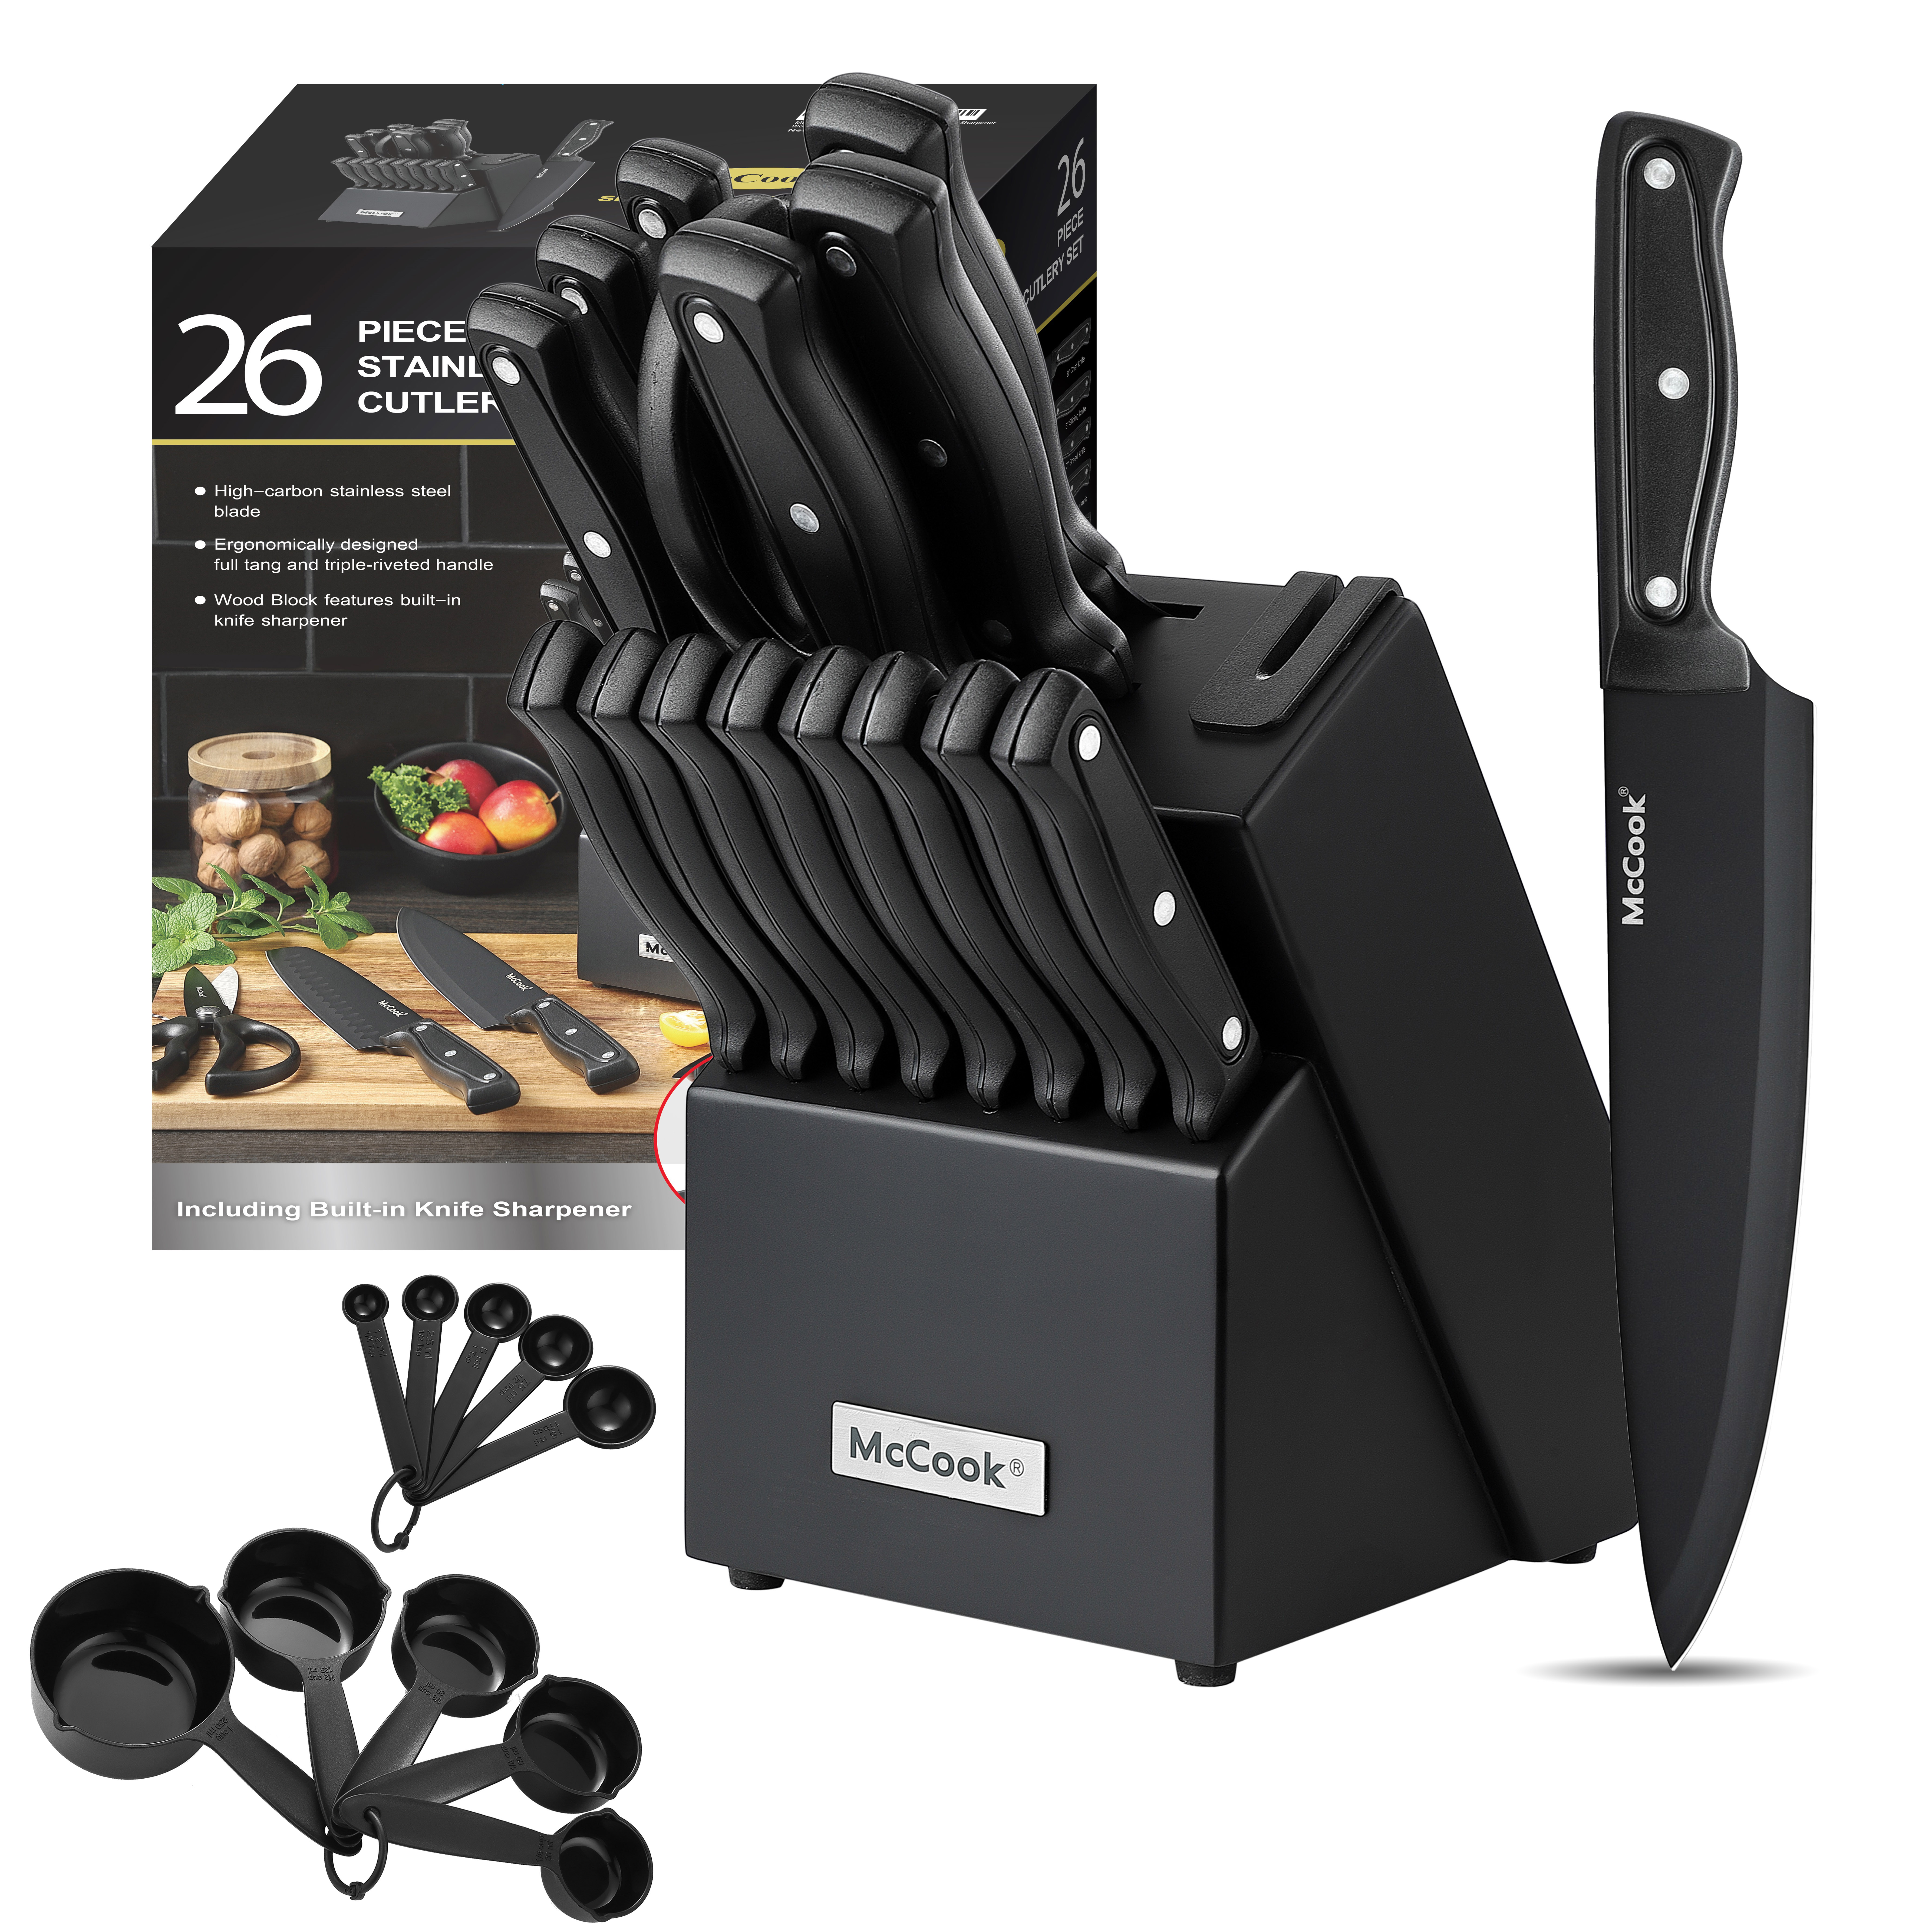 McCook DISHWASHER SAFE MC701 black Knife Sets of 26, Stainless Steel Kitchen Knives Block Set with Built-in Knife Sharpener,Measuring Cups and Spoons - image 1 of 9